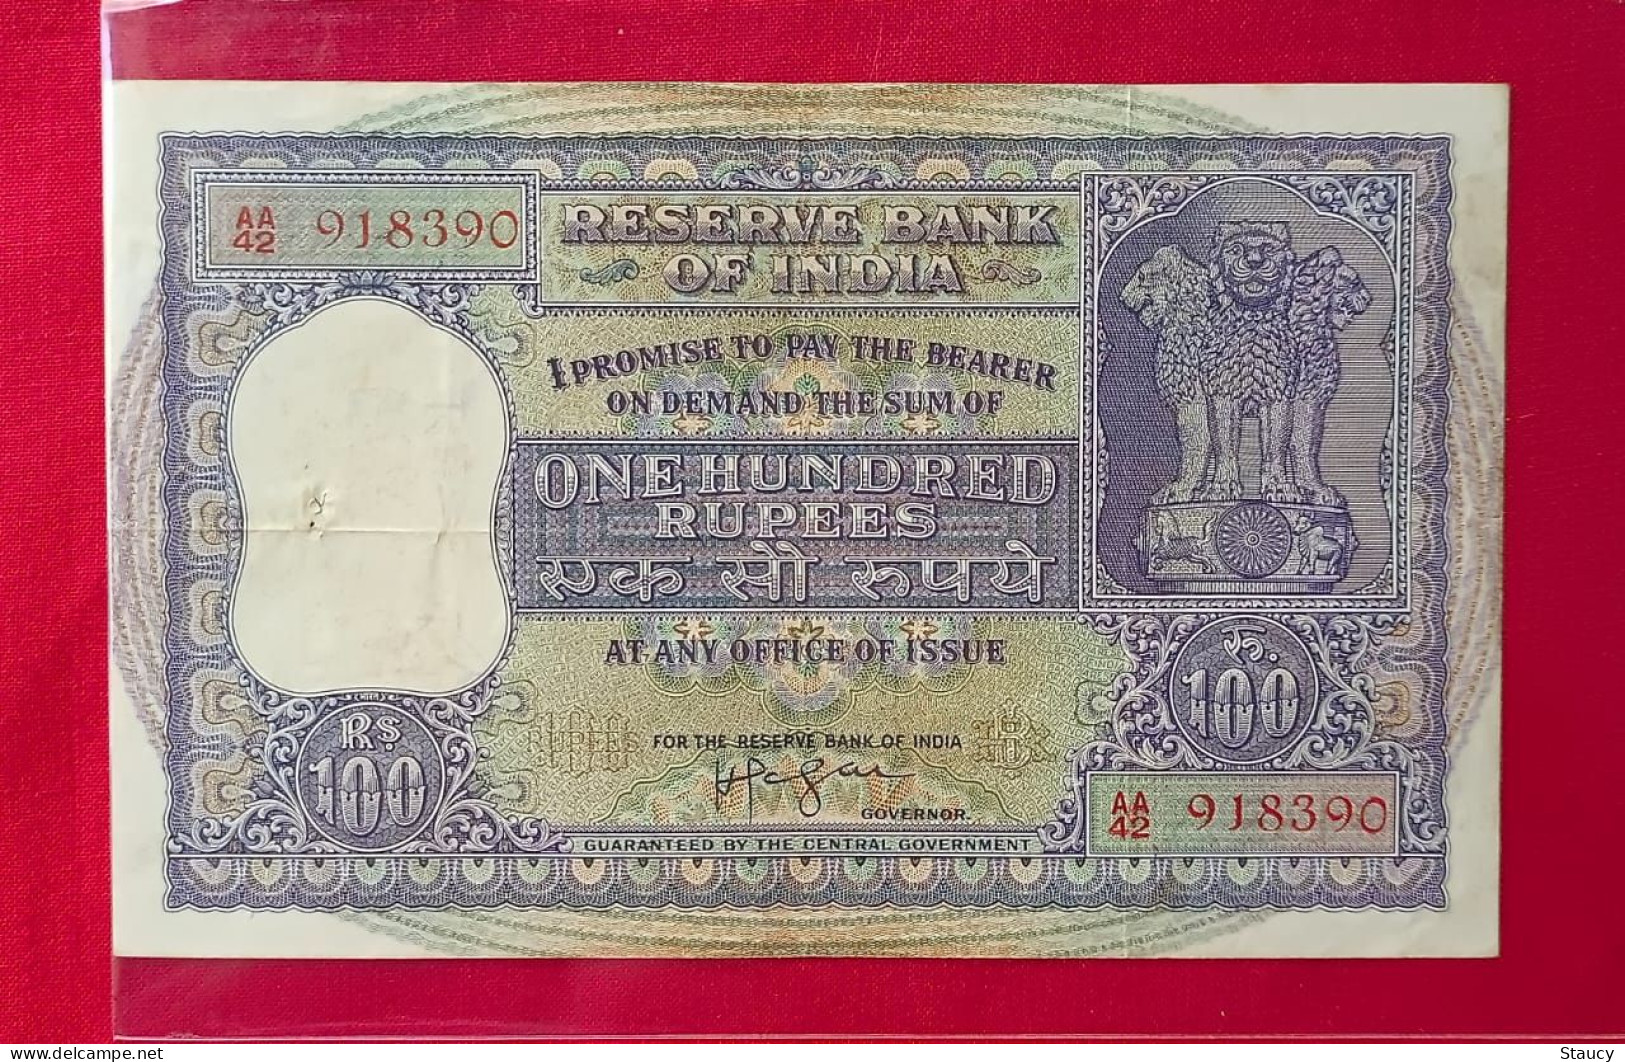 INDIA 1957 Rs.100 One Hundred Rupees Banknote Of Republic Of India Signed By H V R Iyengar Fine As Per Scan - India